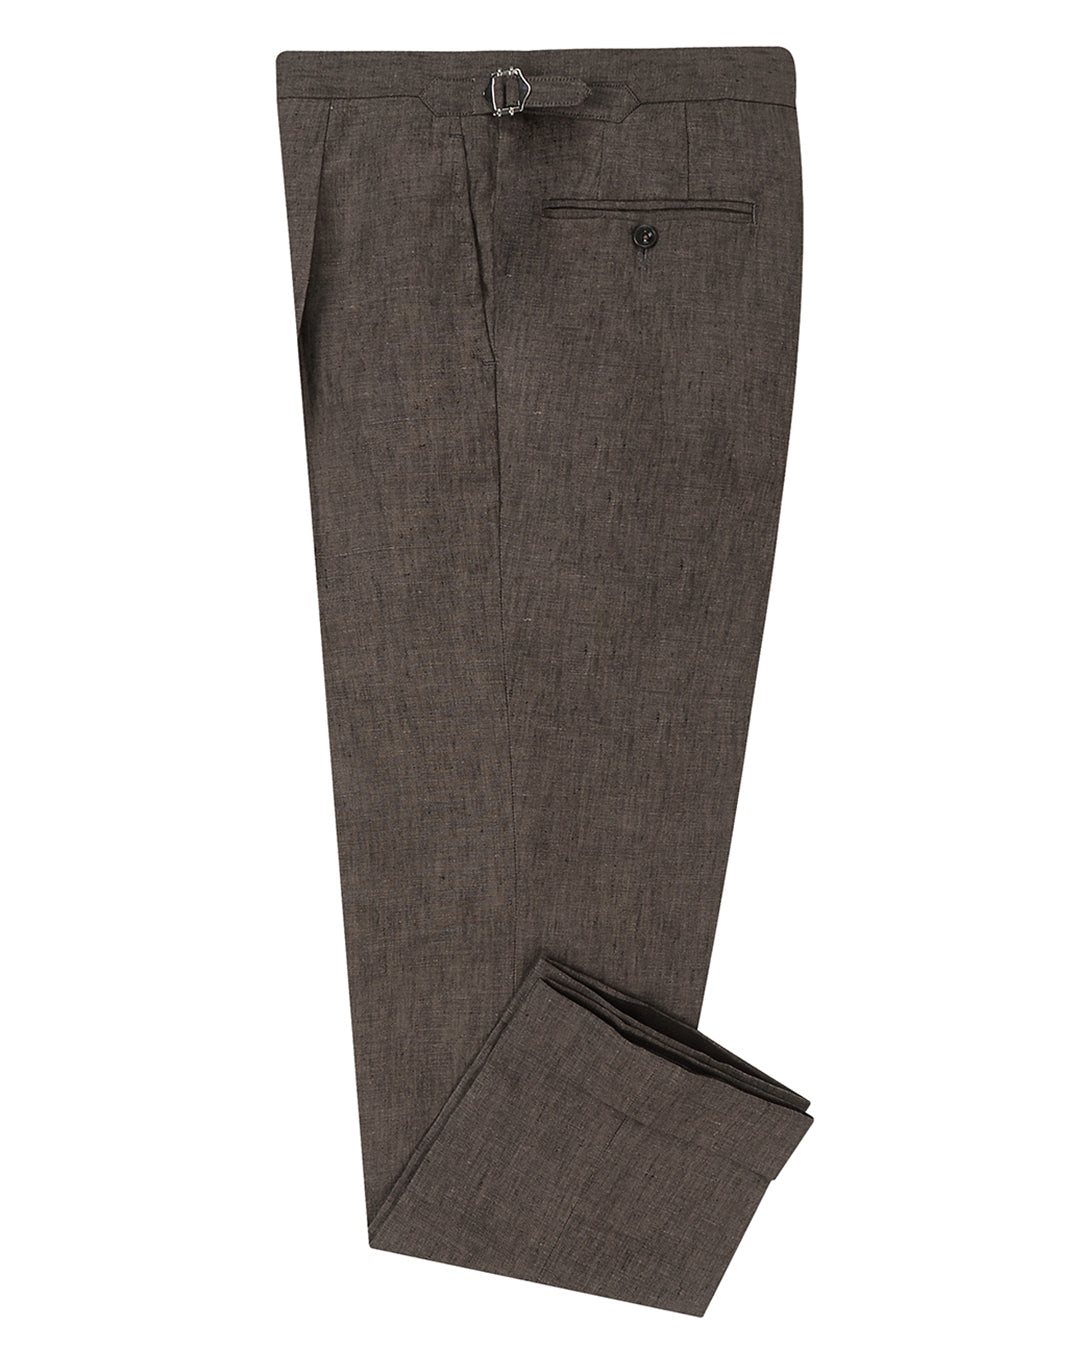 Side view of custom linen pants for men by Luxire in drab brown